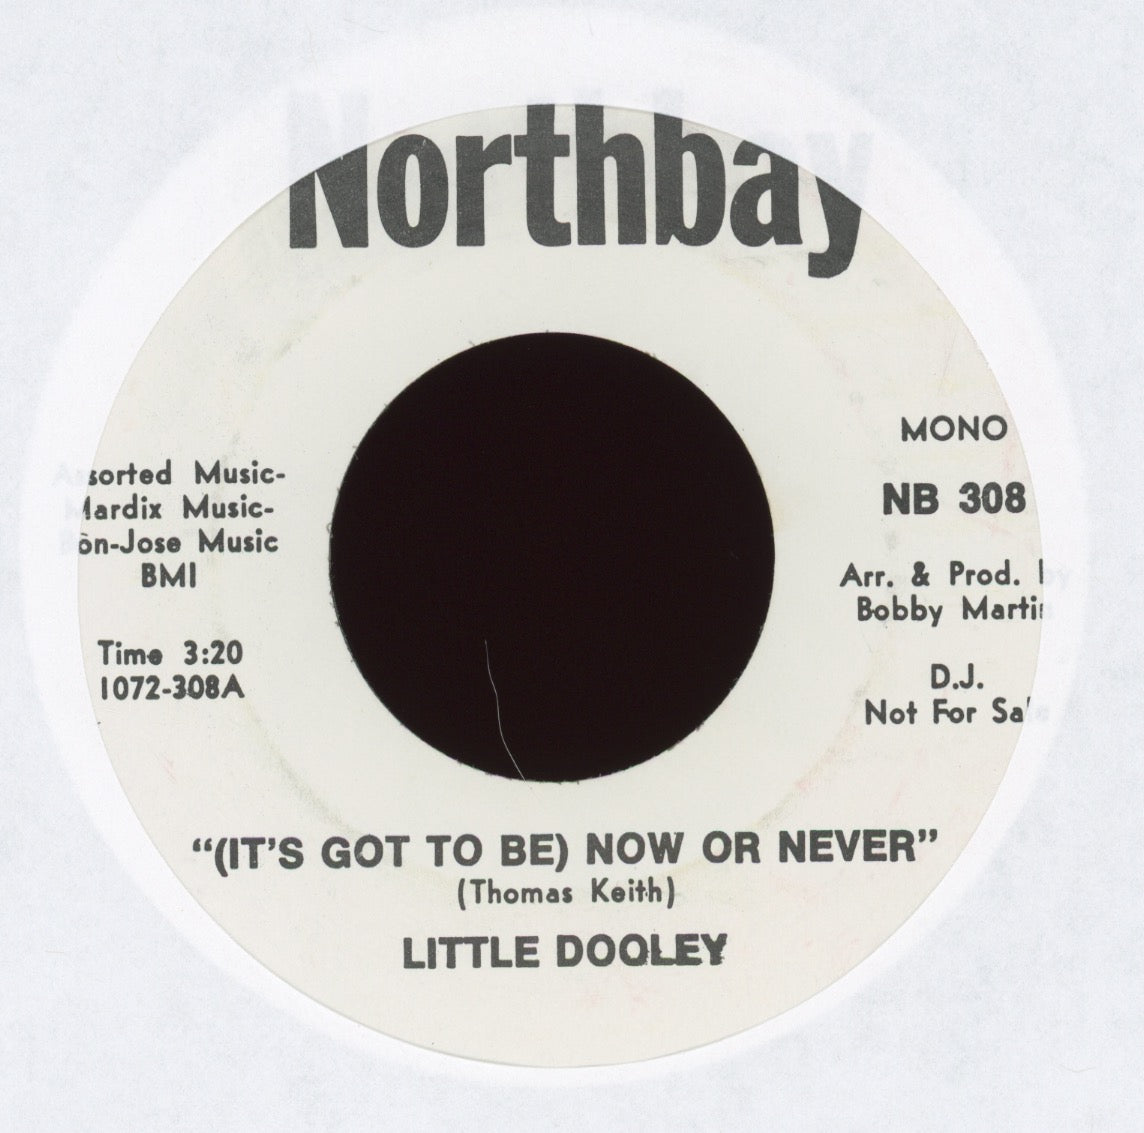 Little Dooley - (It's Got To Be) Now Or Never on Northbay Promo Crossover Northern Soul 45